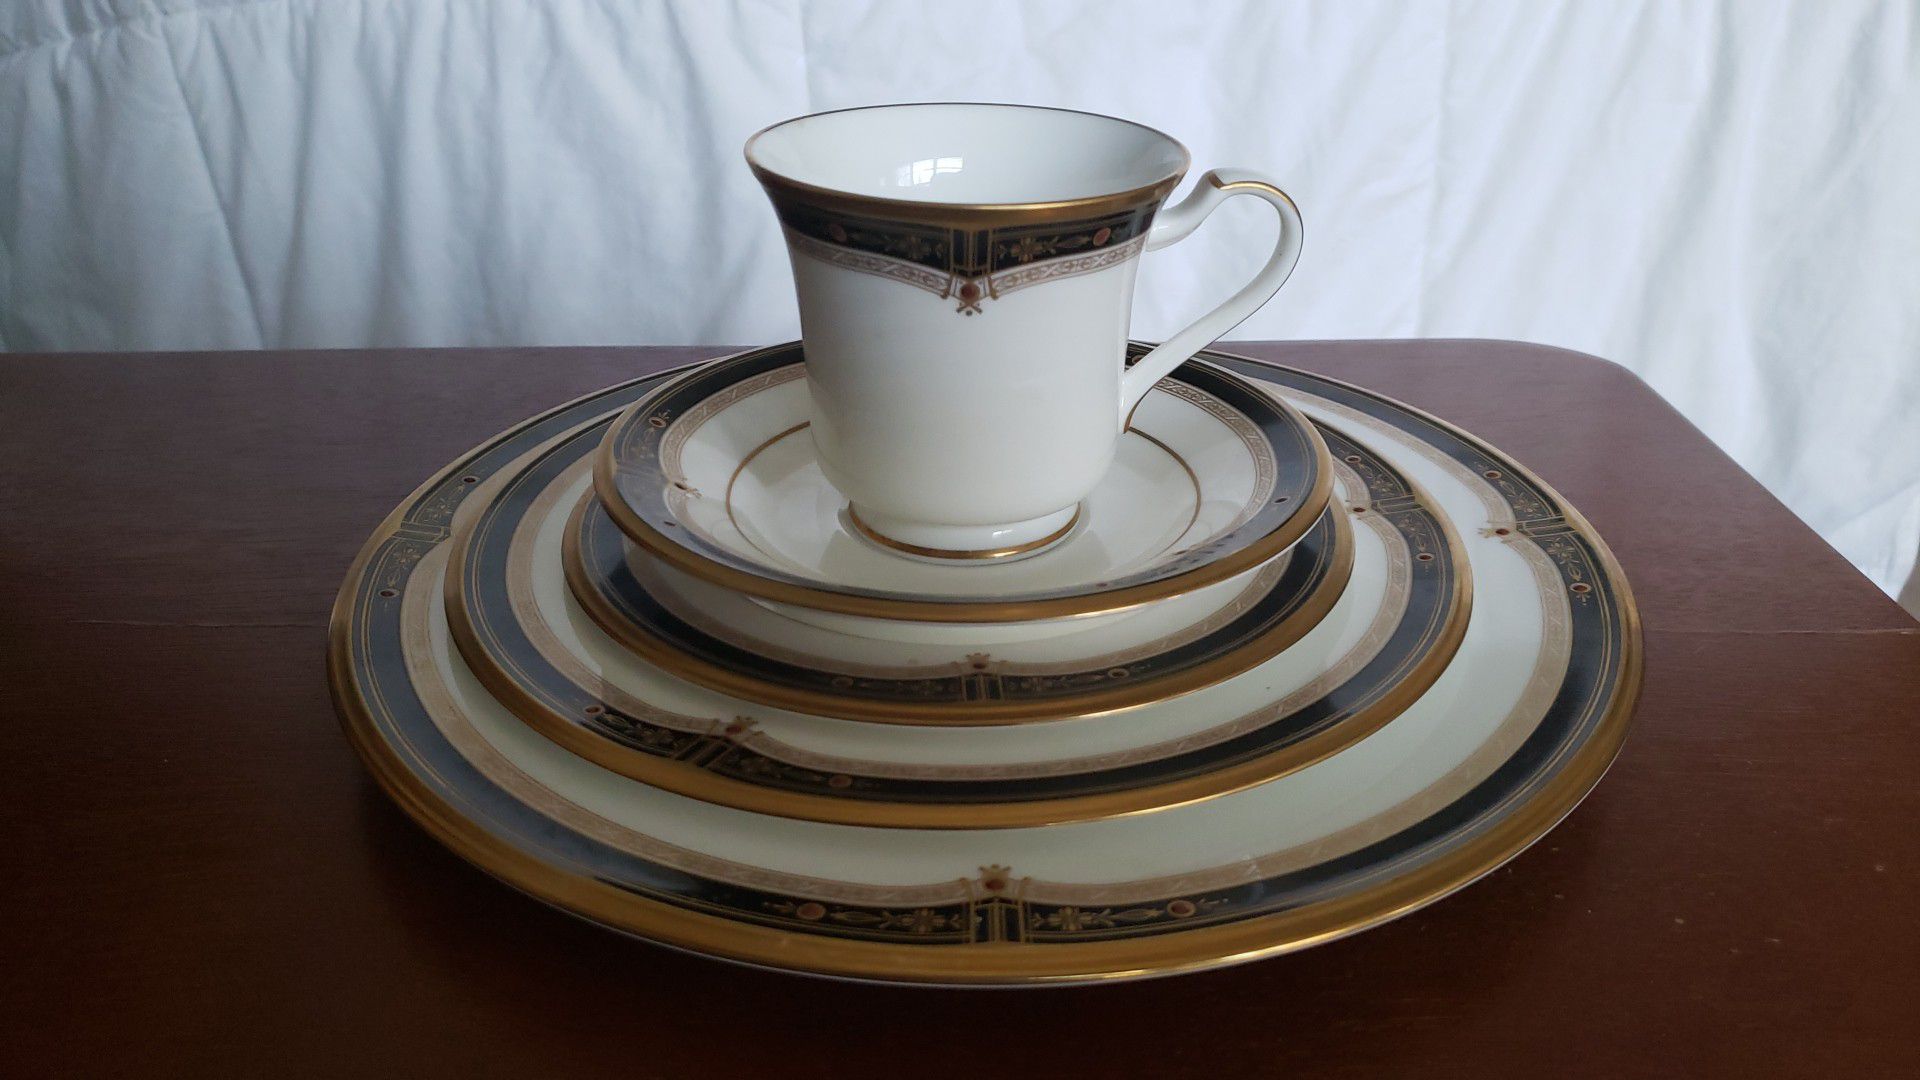 Noratake - 5 Piece Place Setting - Gold and Sable Pattern